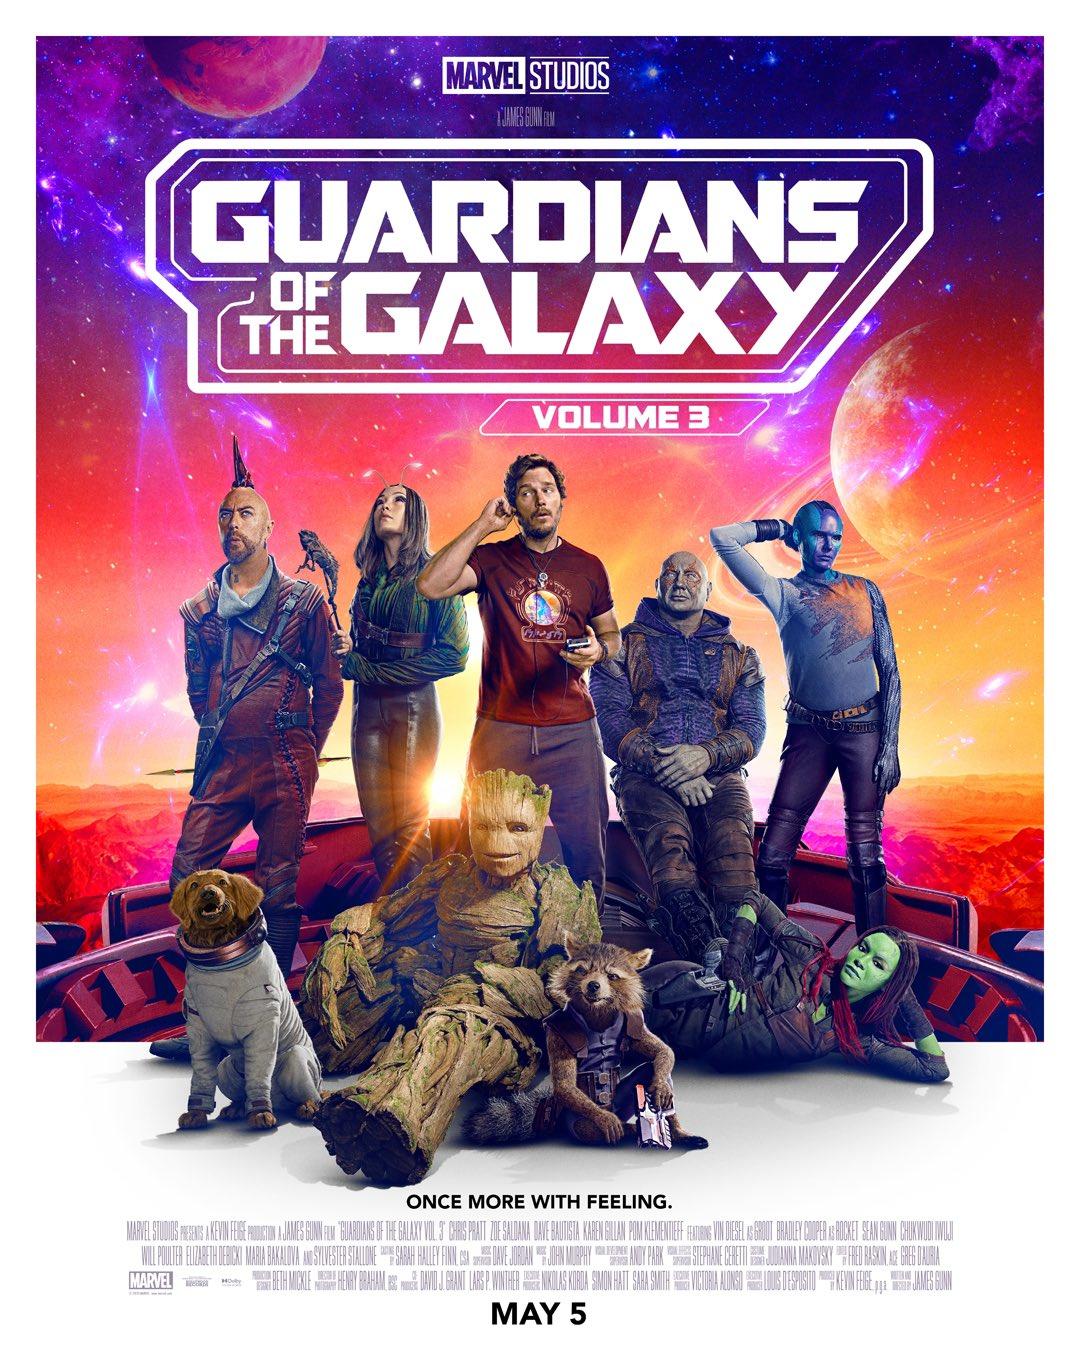 Guardians of the Galaxy Vol 3 Trailer & Poster